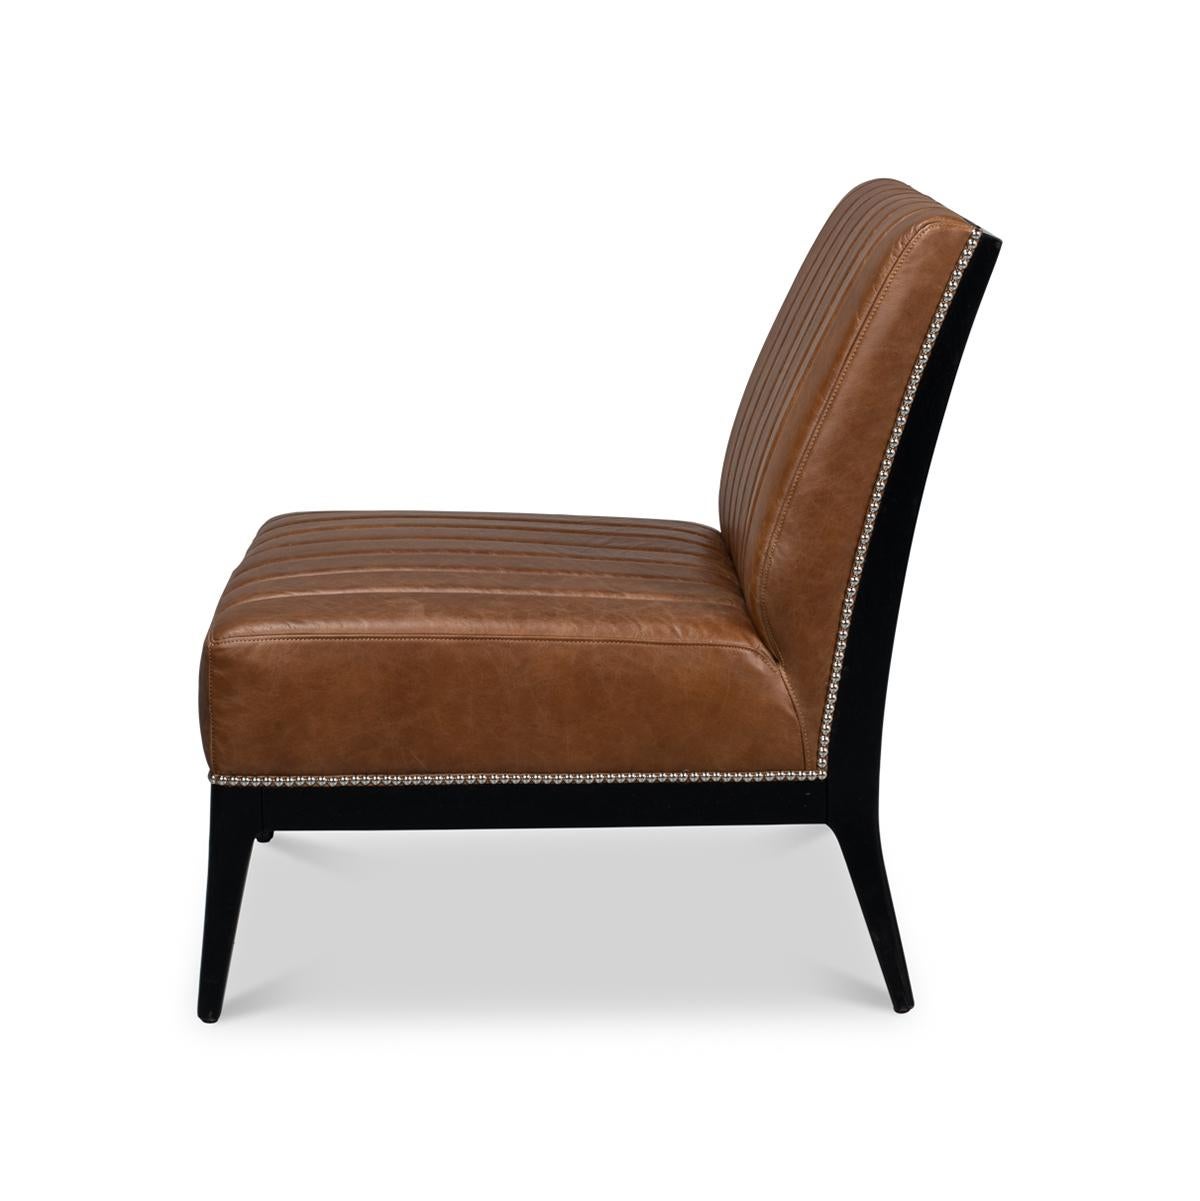 A piece that effortlessly elevates any room with its classic charm and superior craftsmanship. Designed with an uncluttered and sophisticated silhouette, this chair not only serves as a statement of style but also as a sanctuary of comfort.

The